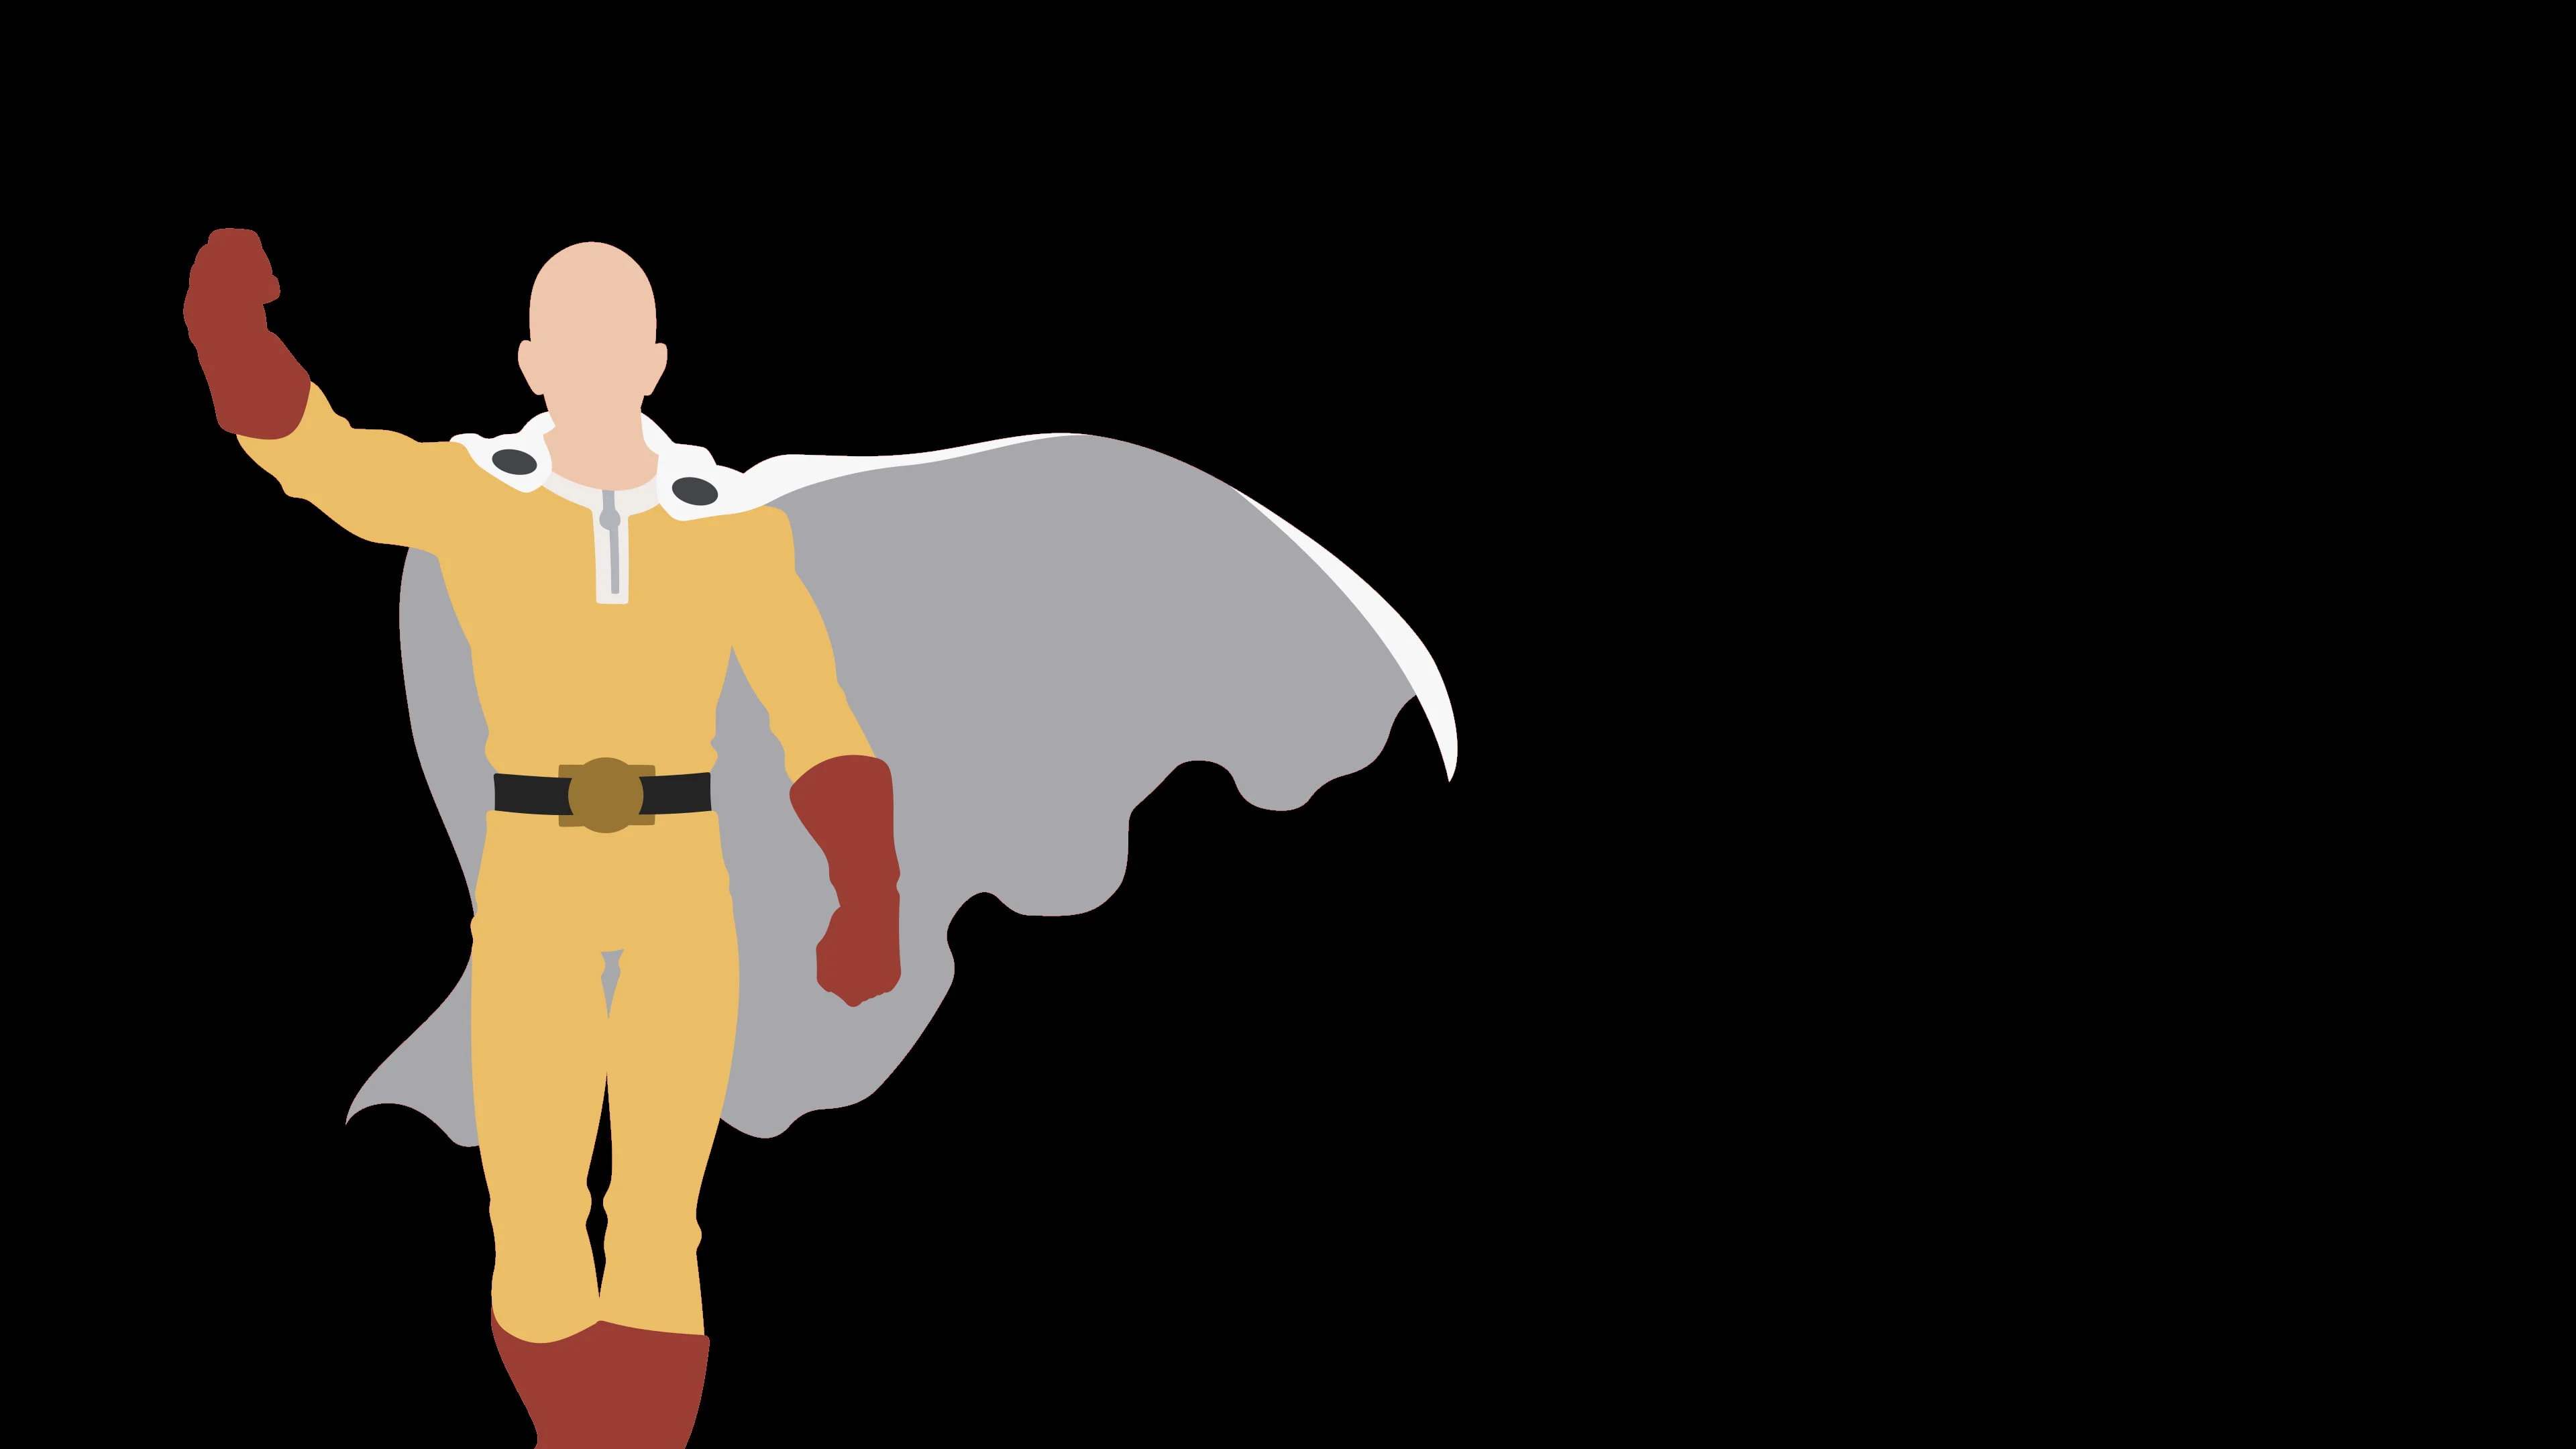 3840x2160 One Punch Man Minimalist Wallpapers Top Free One Punch Man Minimalist Backgrounds